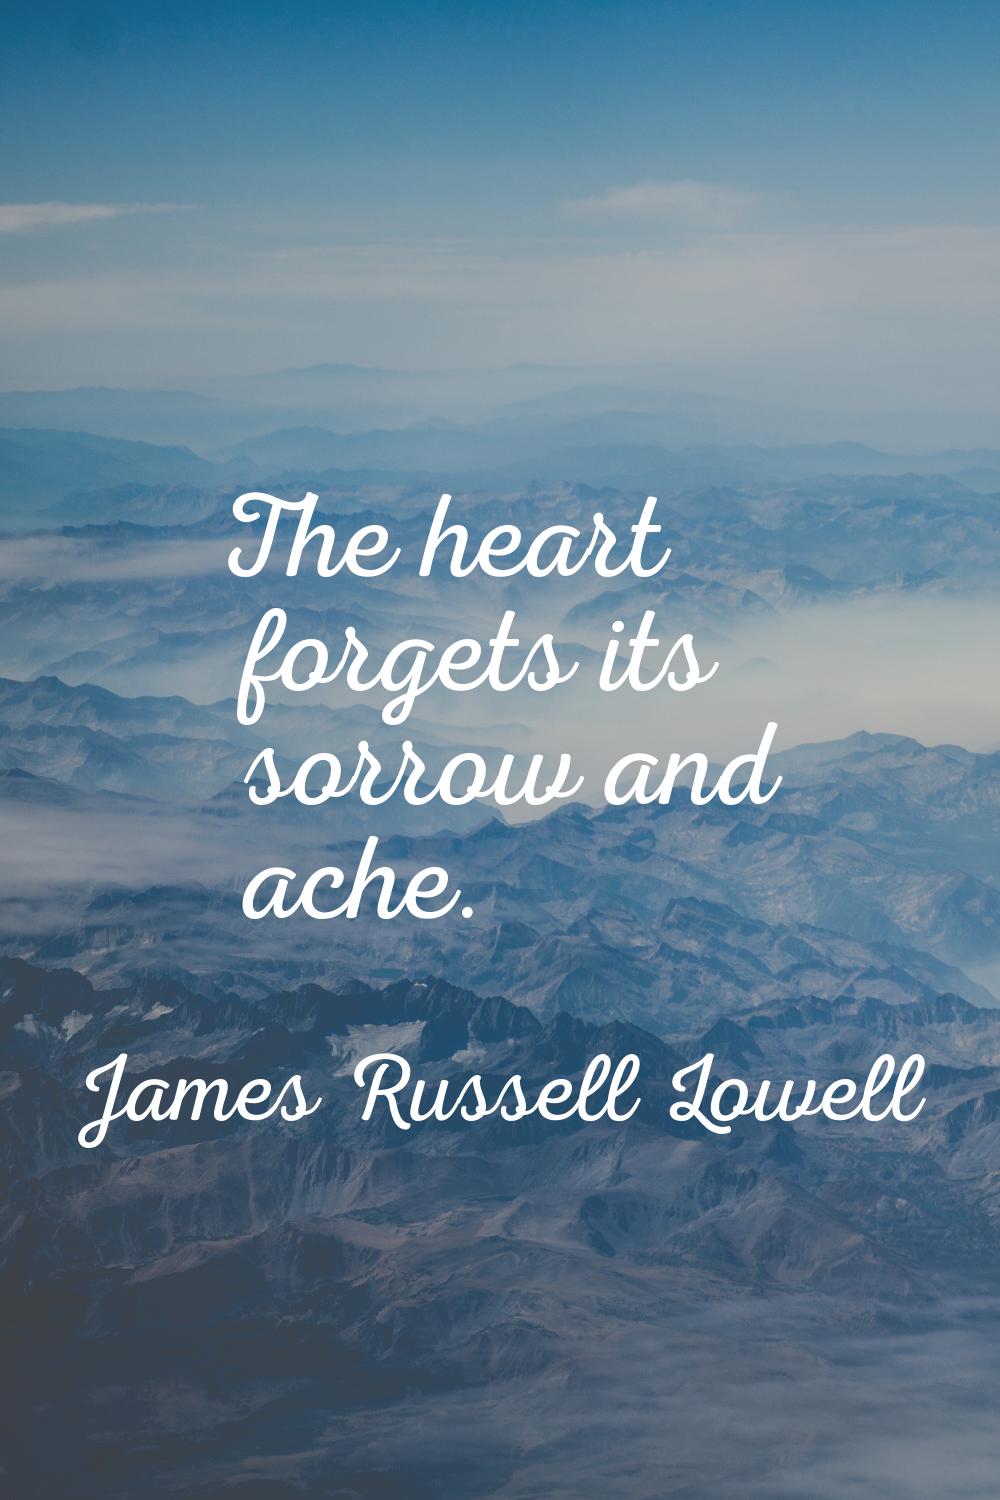 The heart forgets its sorrow and ache.